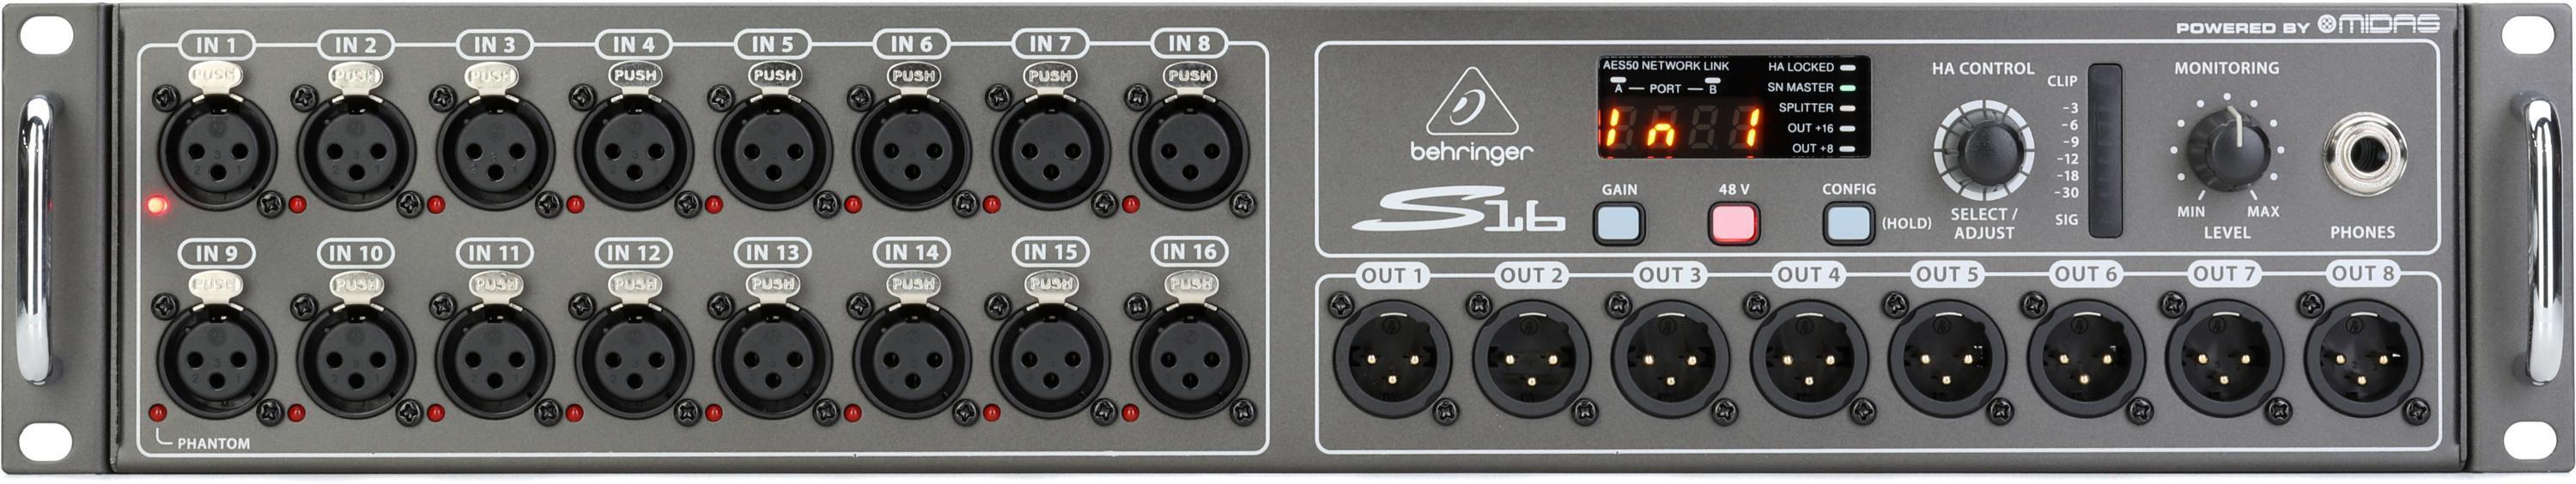 Behringer S16 16-input / 8-output Digital Stage Box | Sweetwater